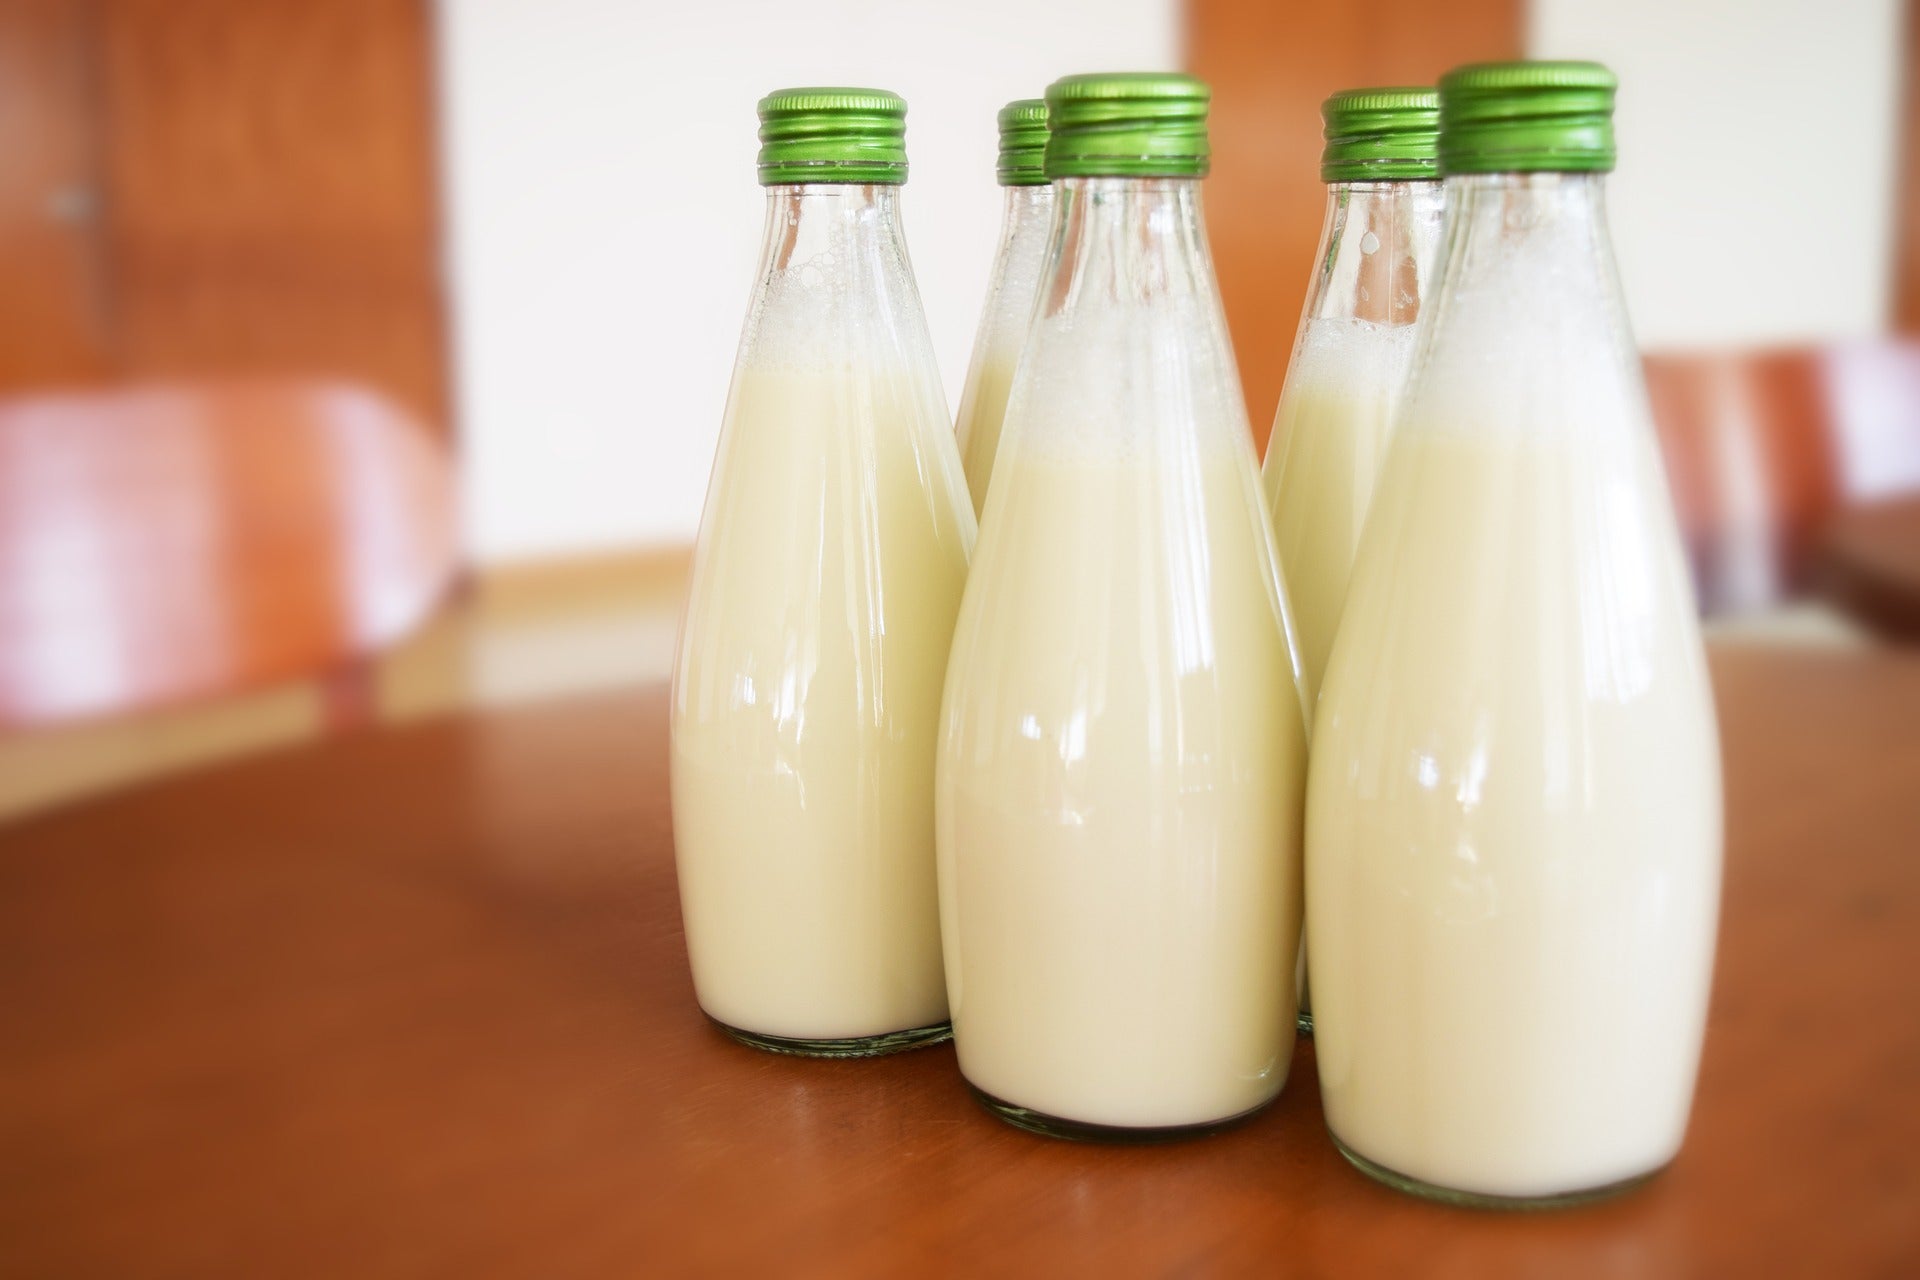 Buttermilk: What Is It and Why Should I Use It?